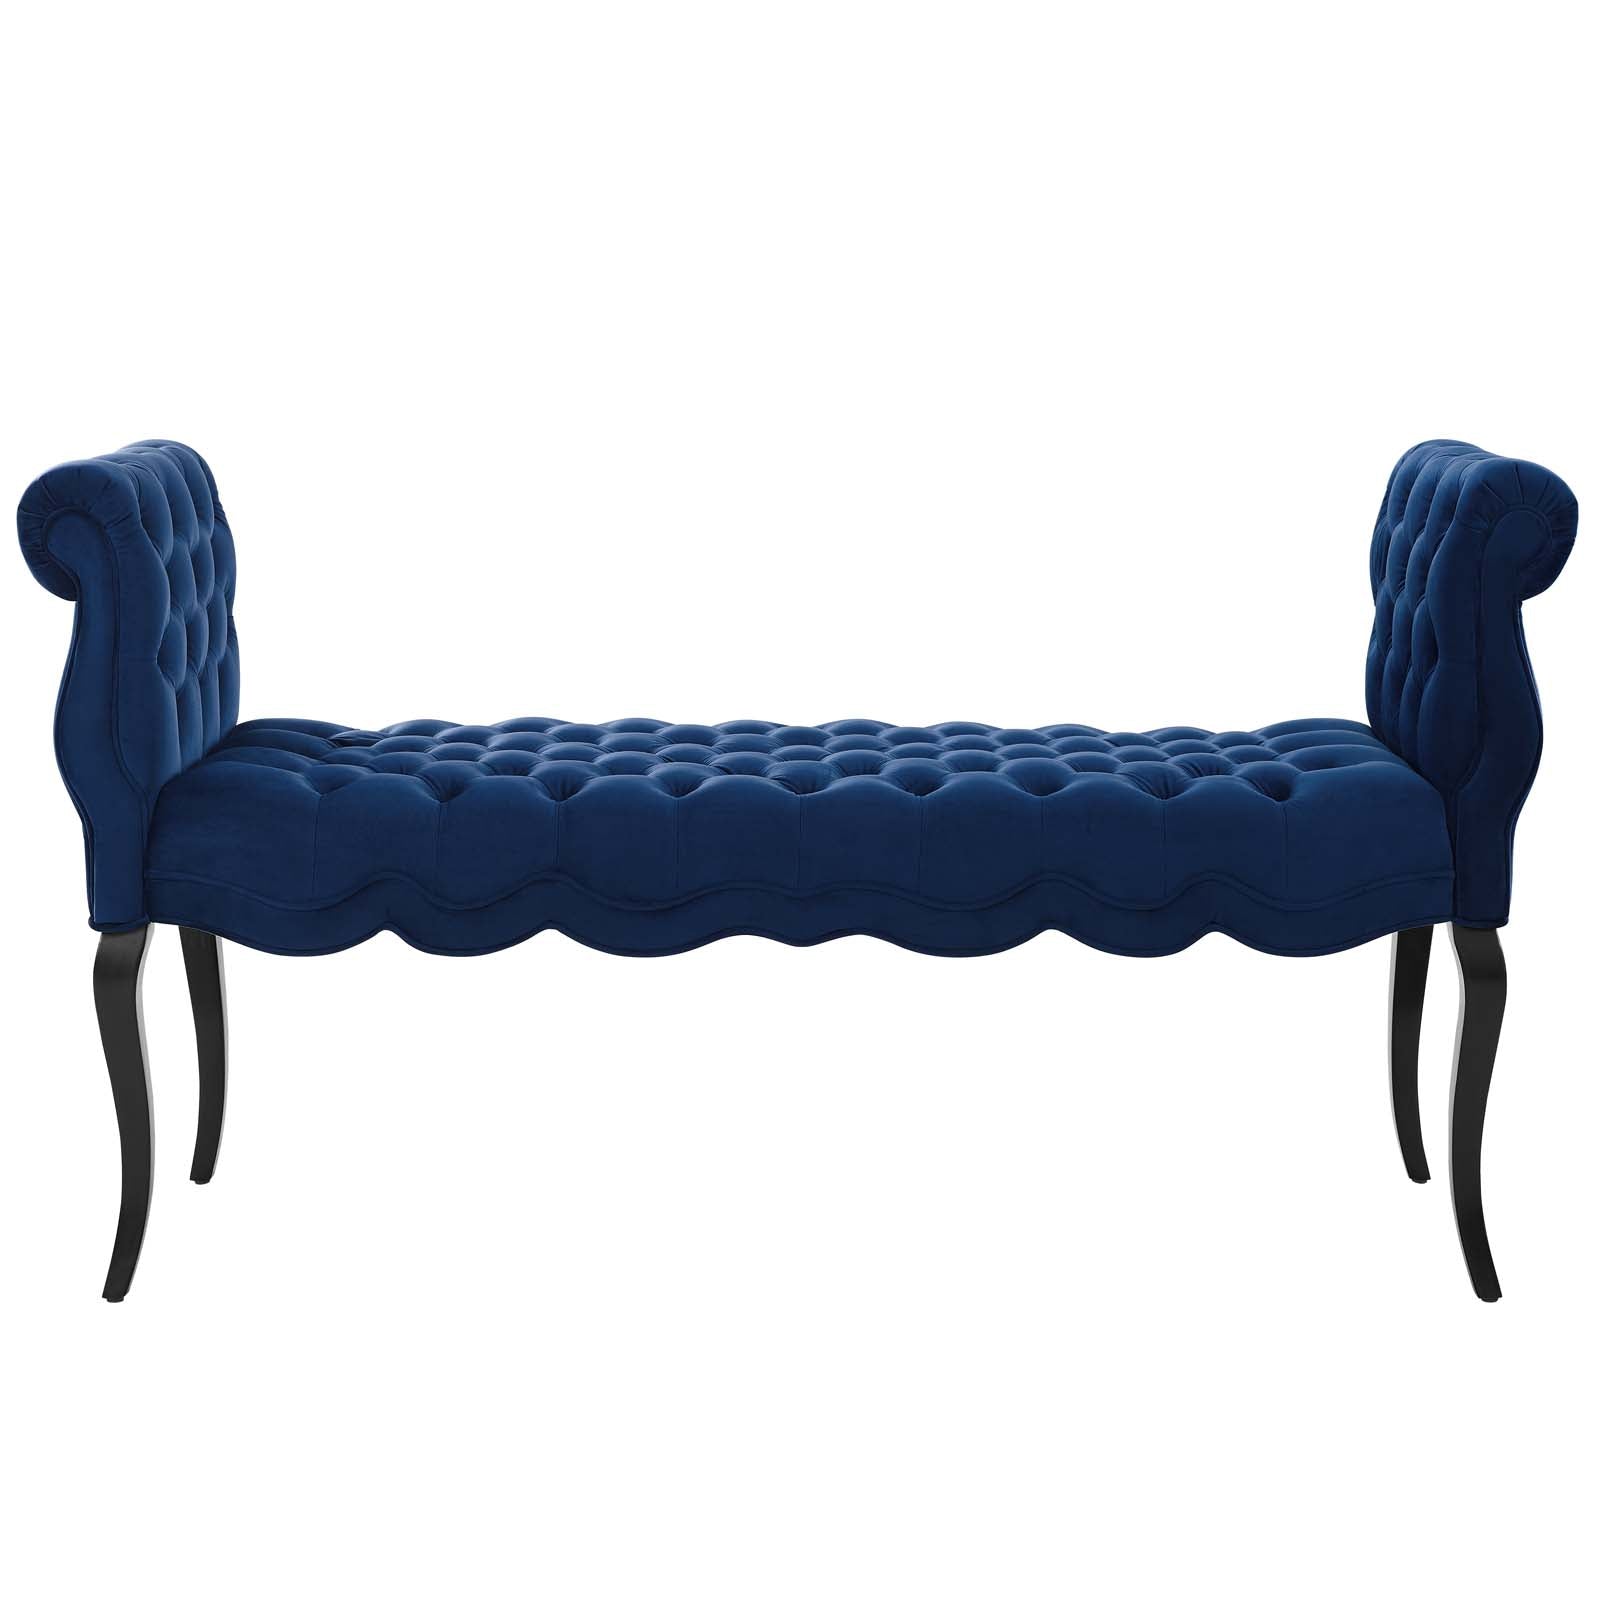 Modway Benches - Adelia Chesterfield Bench Navy